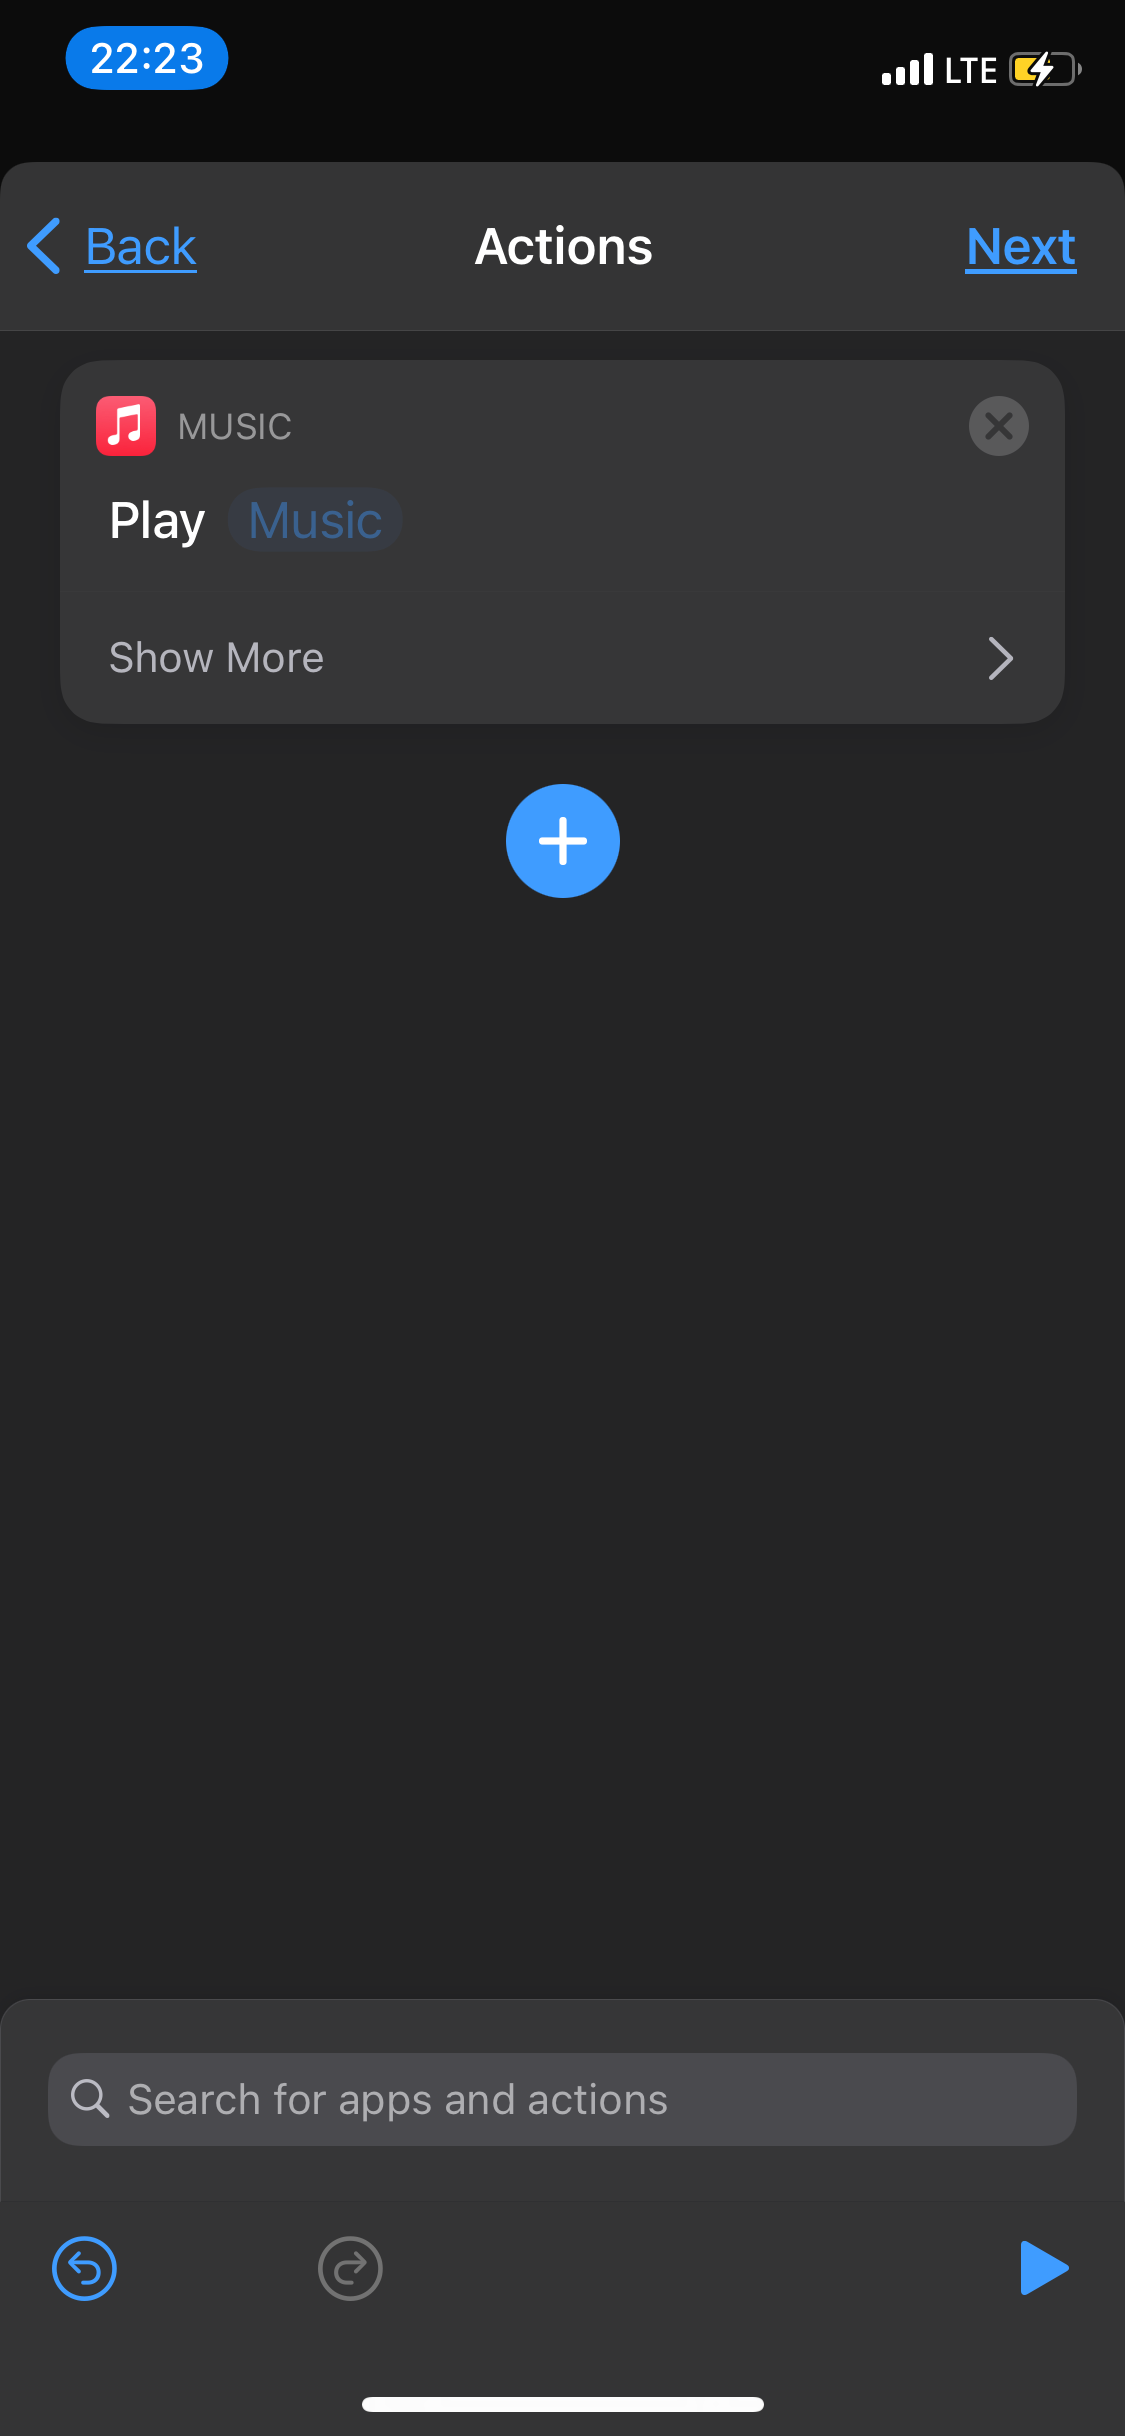 Music action added to Shortcuts app.